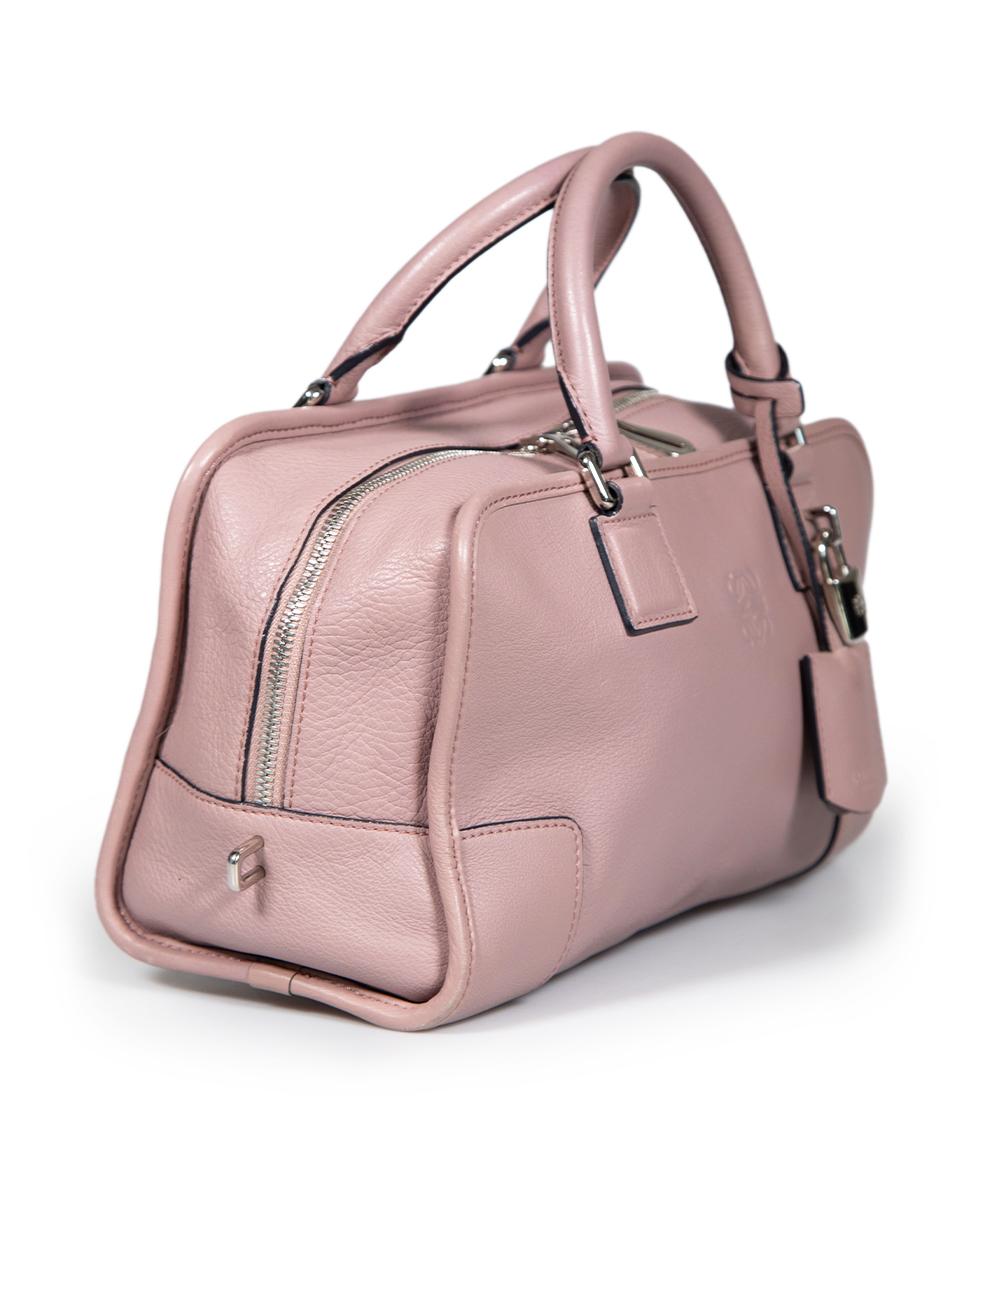 CONDITION is Very good. Minimal wear to bag is evident. Minimal abrasions to bottom corners. There's a pen mark on front handle on this used Loewe designer resale item.
 
 
 
 Details
 
 
 Model: Amazona 28
 
 Mauve
 
 Leather
 
 Mini handbag
 
 2x